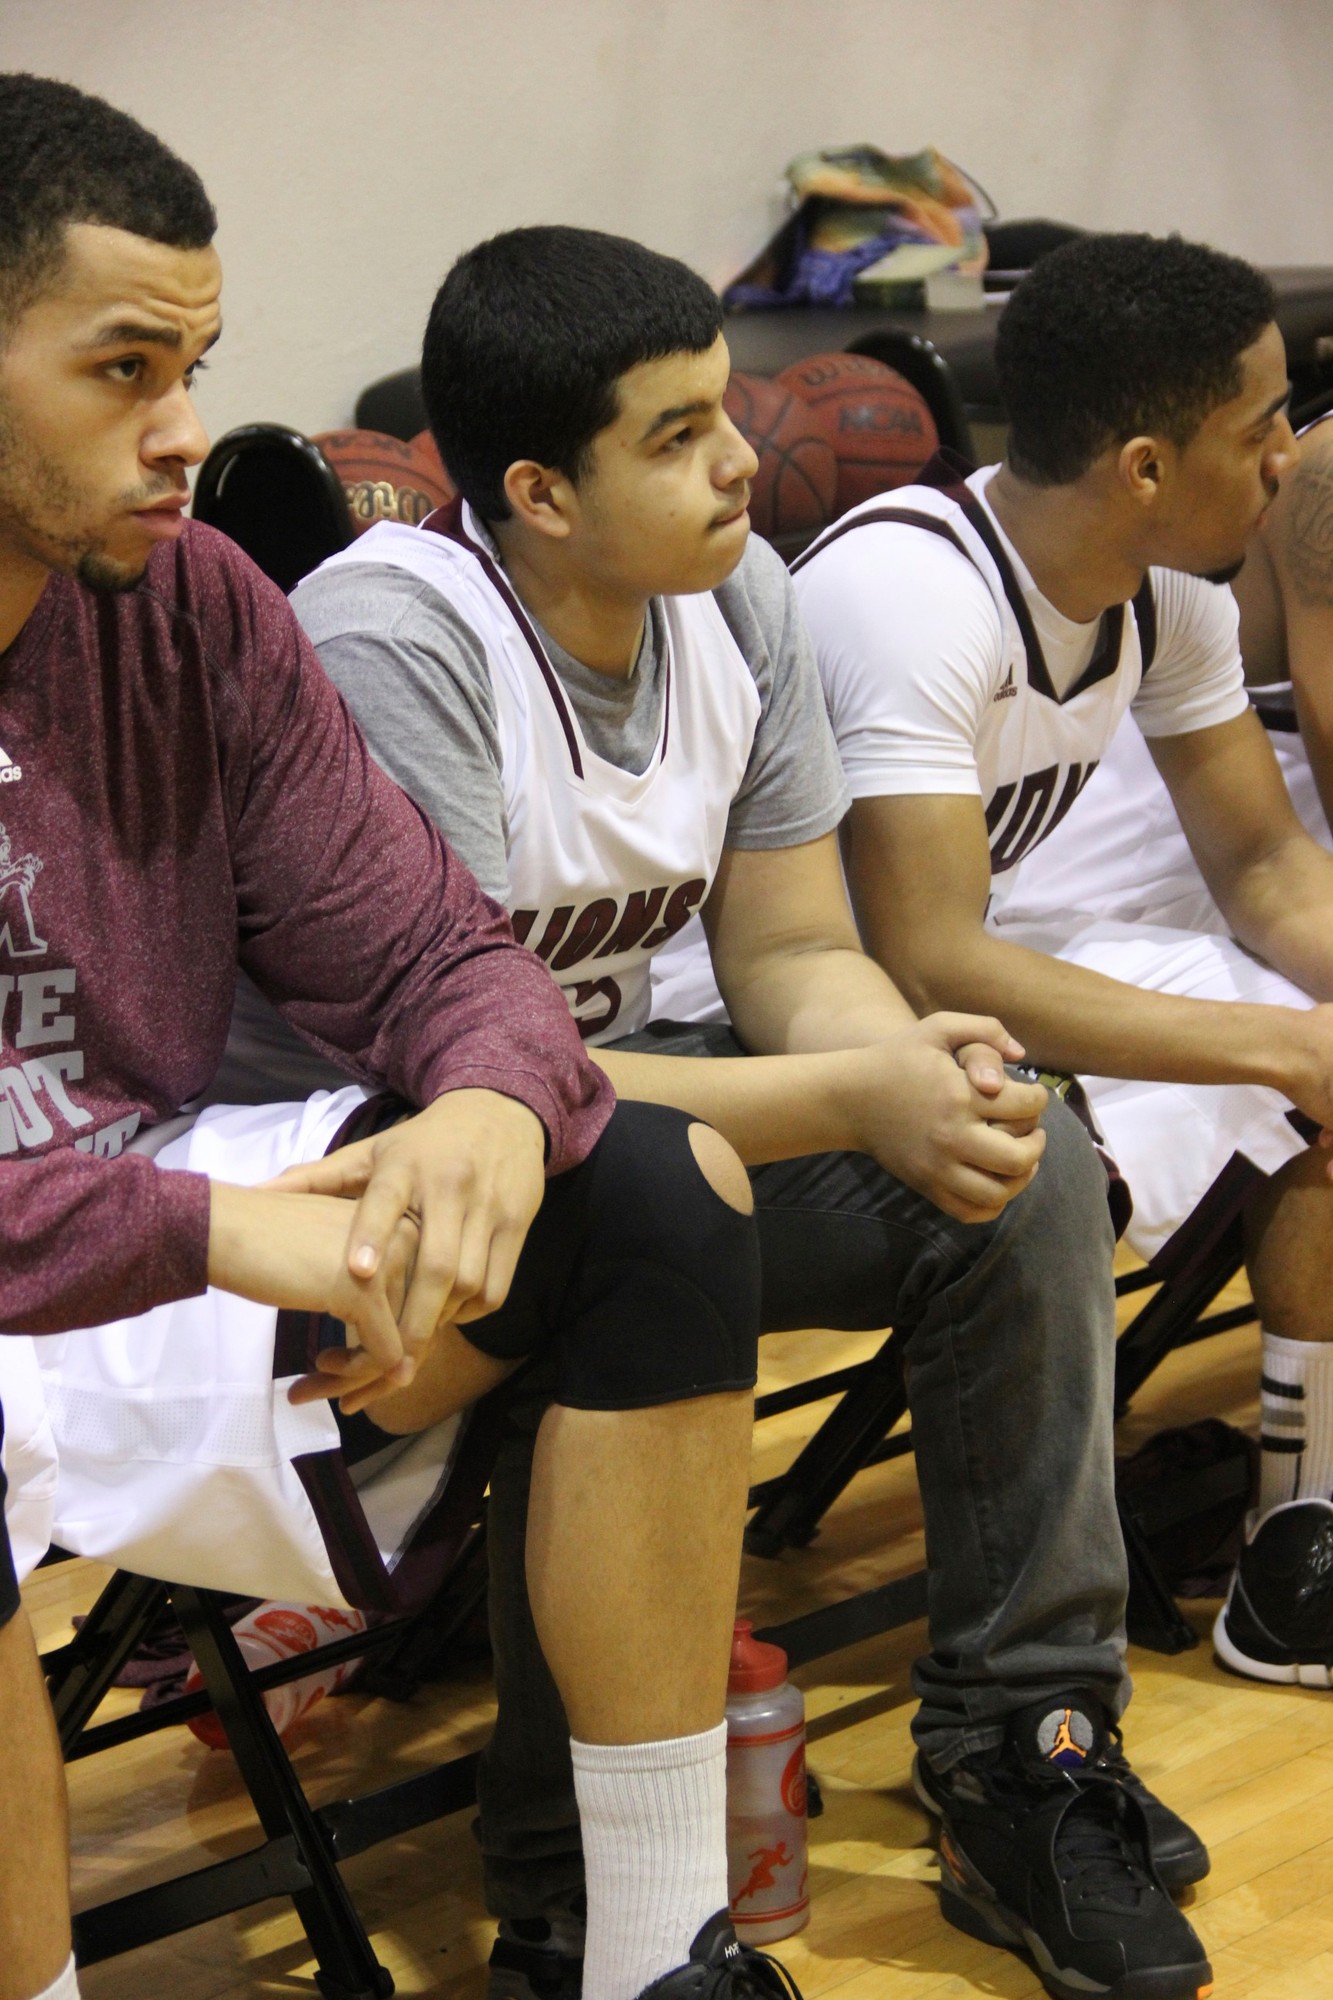 Perez had a seat on the bench for the day with the Molloy Lions.